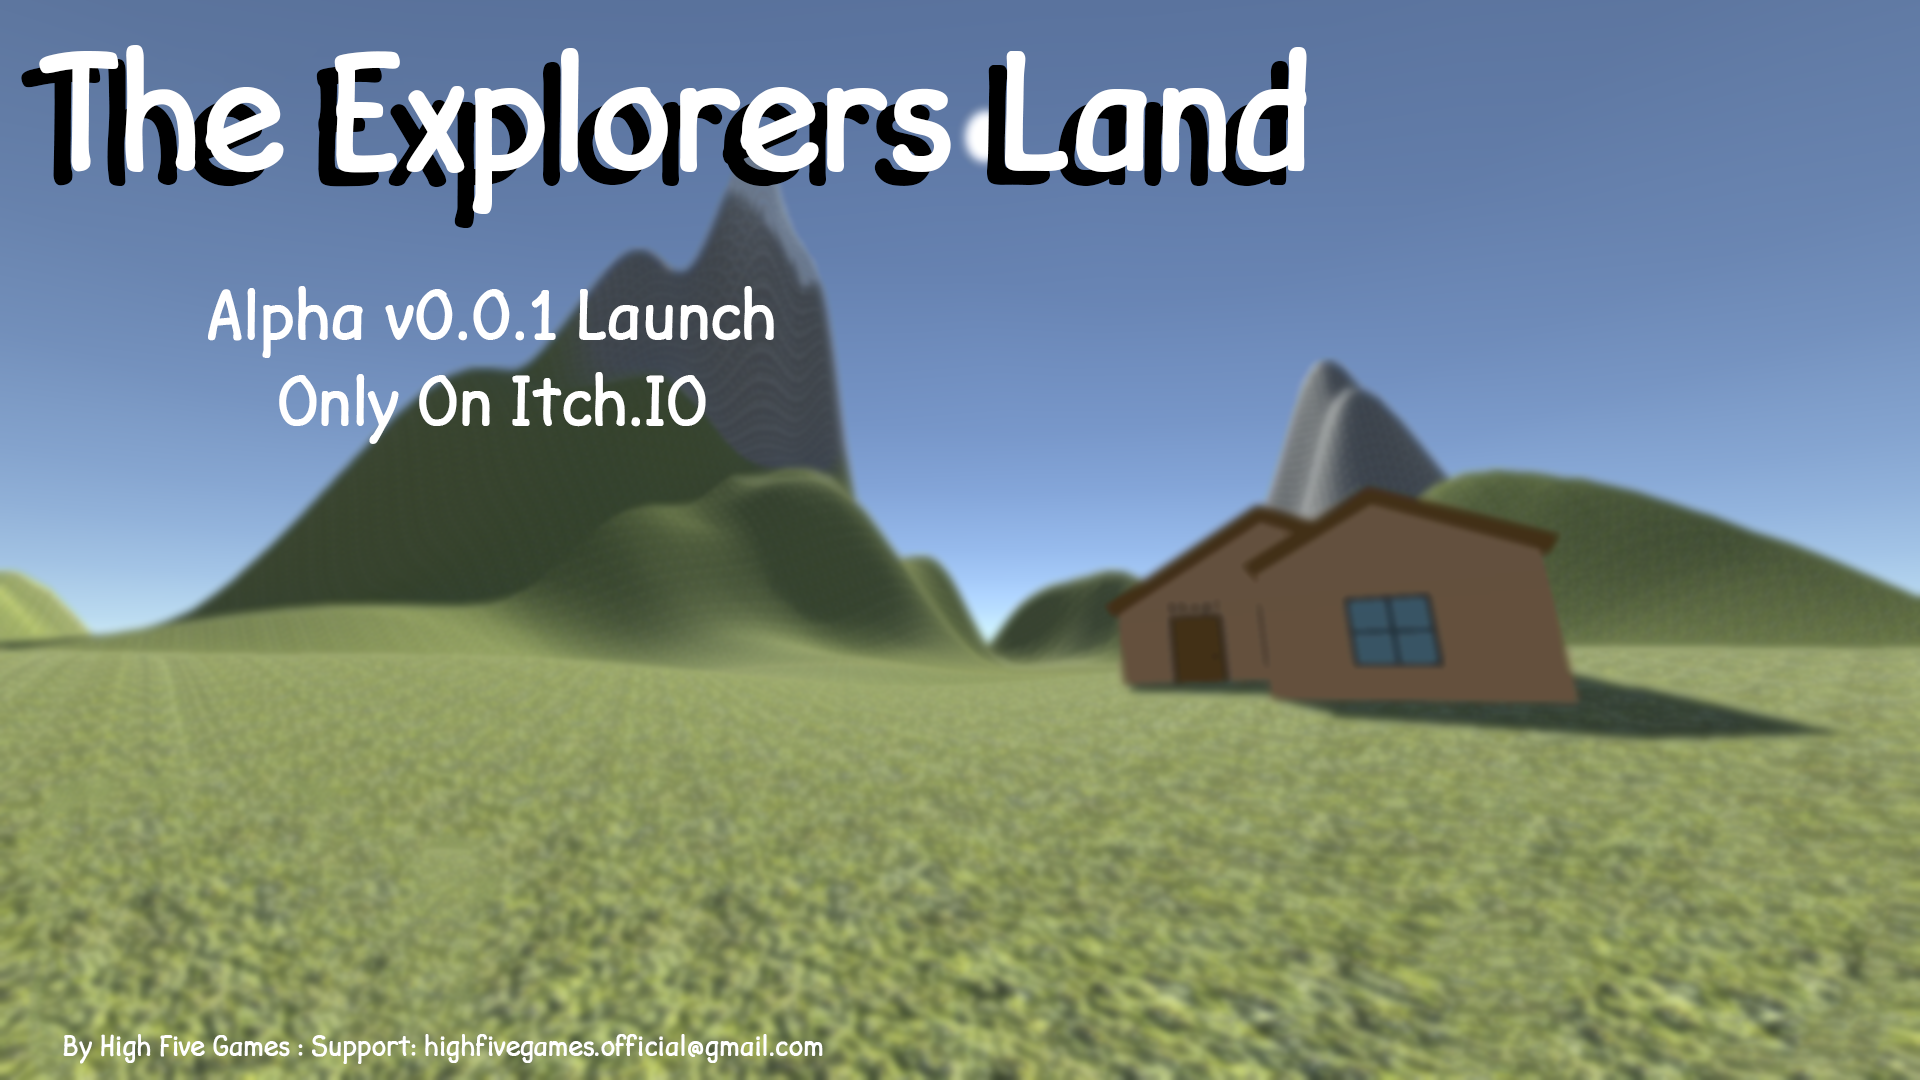 The Explorers Land (Name Might Change)